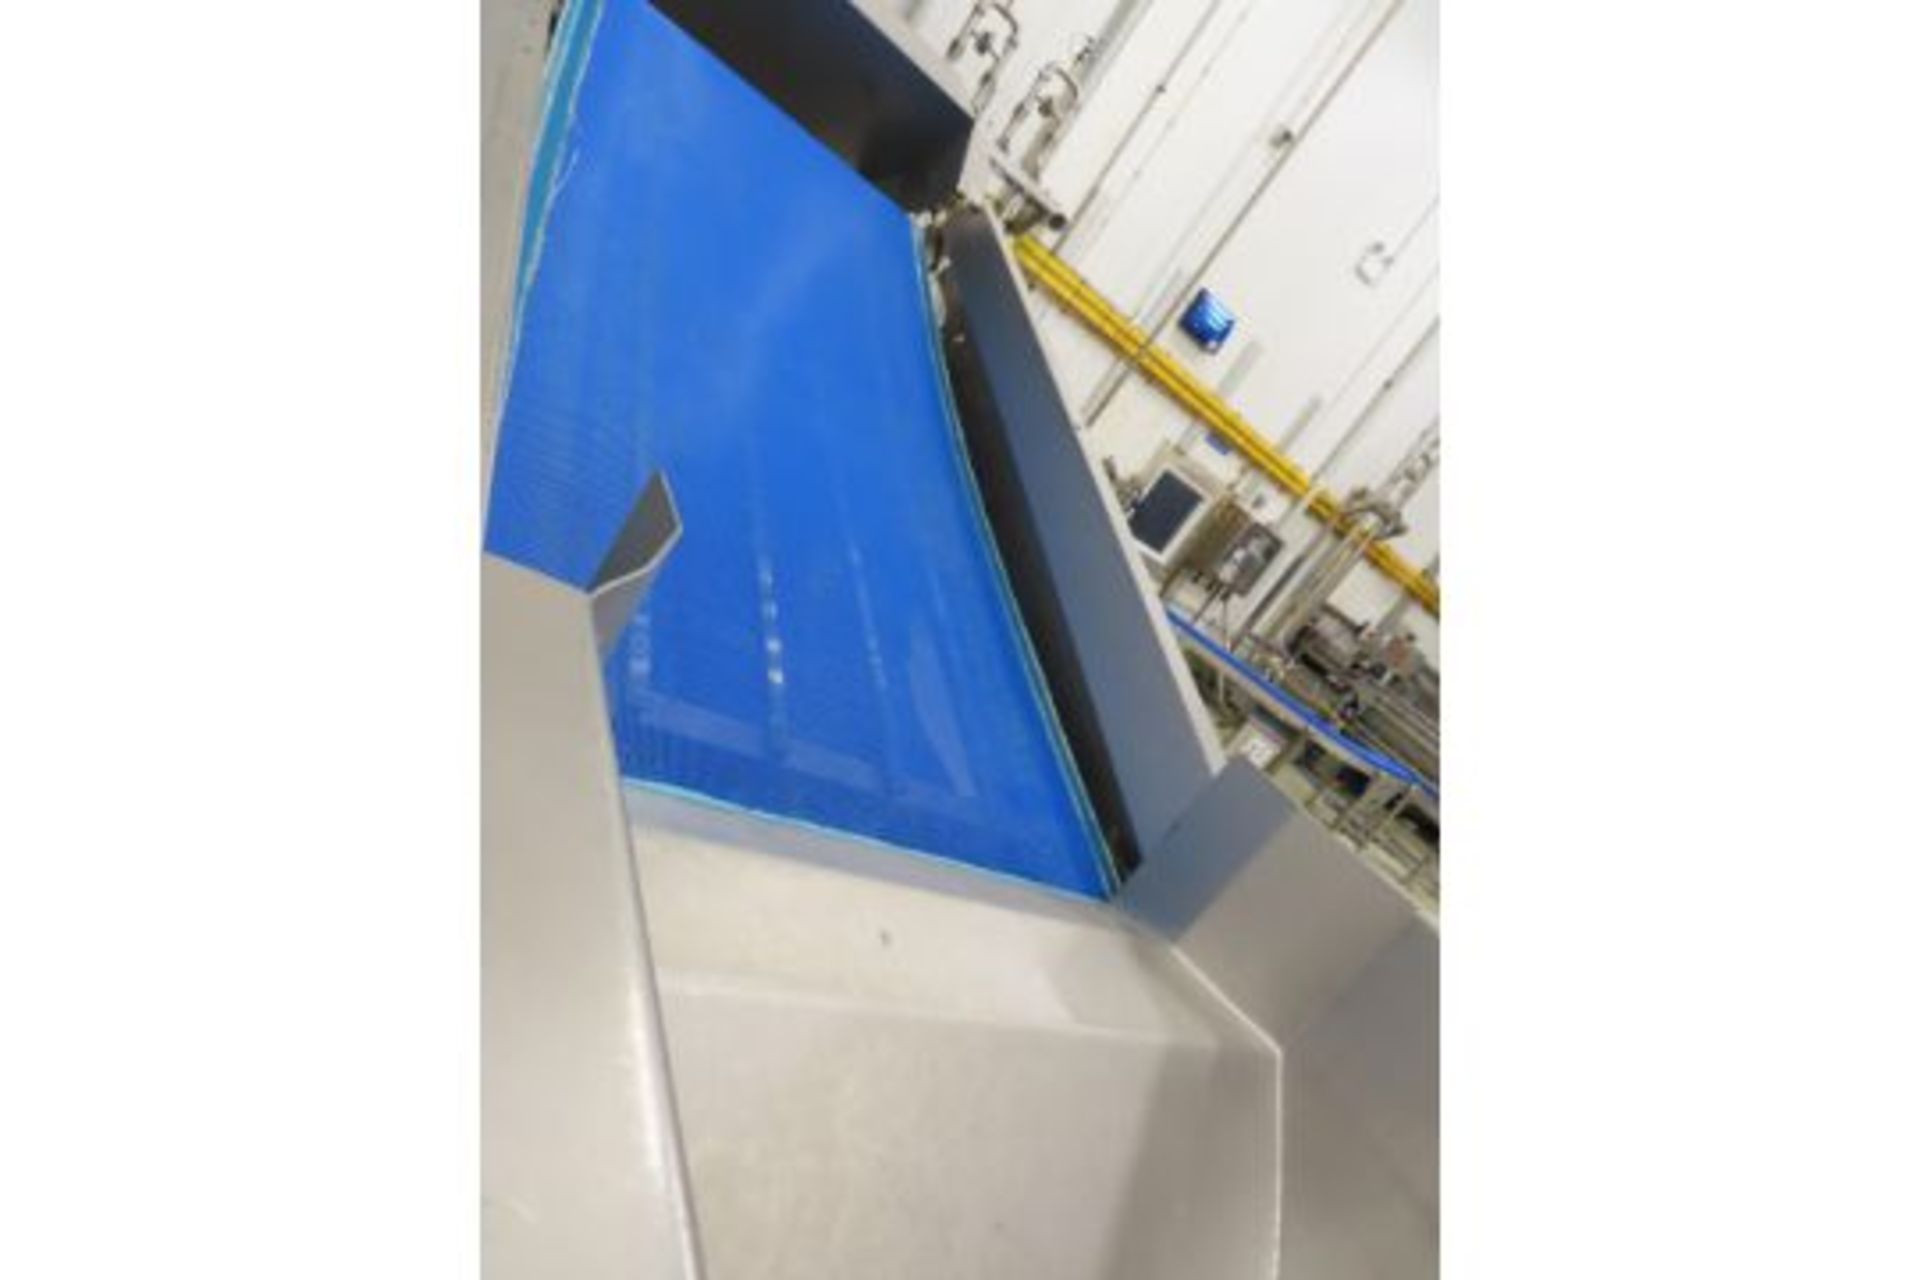 KRONEN GEWA 4000V+ FLUME WASHER AND WATER FILTRATION SYSTEM. - Image 5 of 5